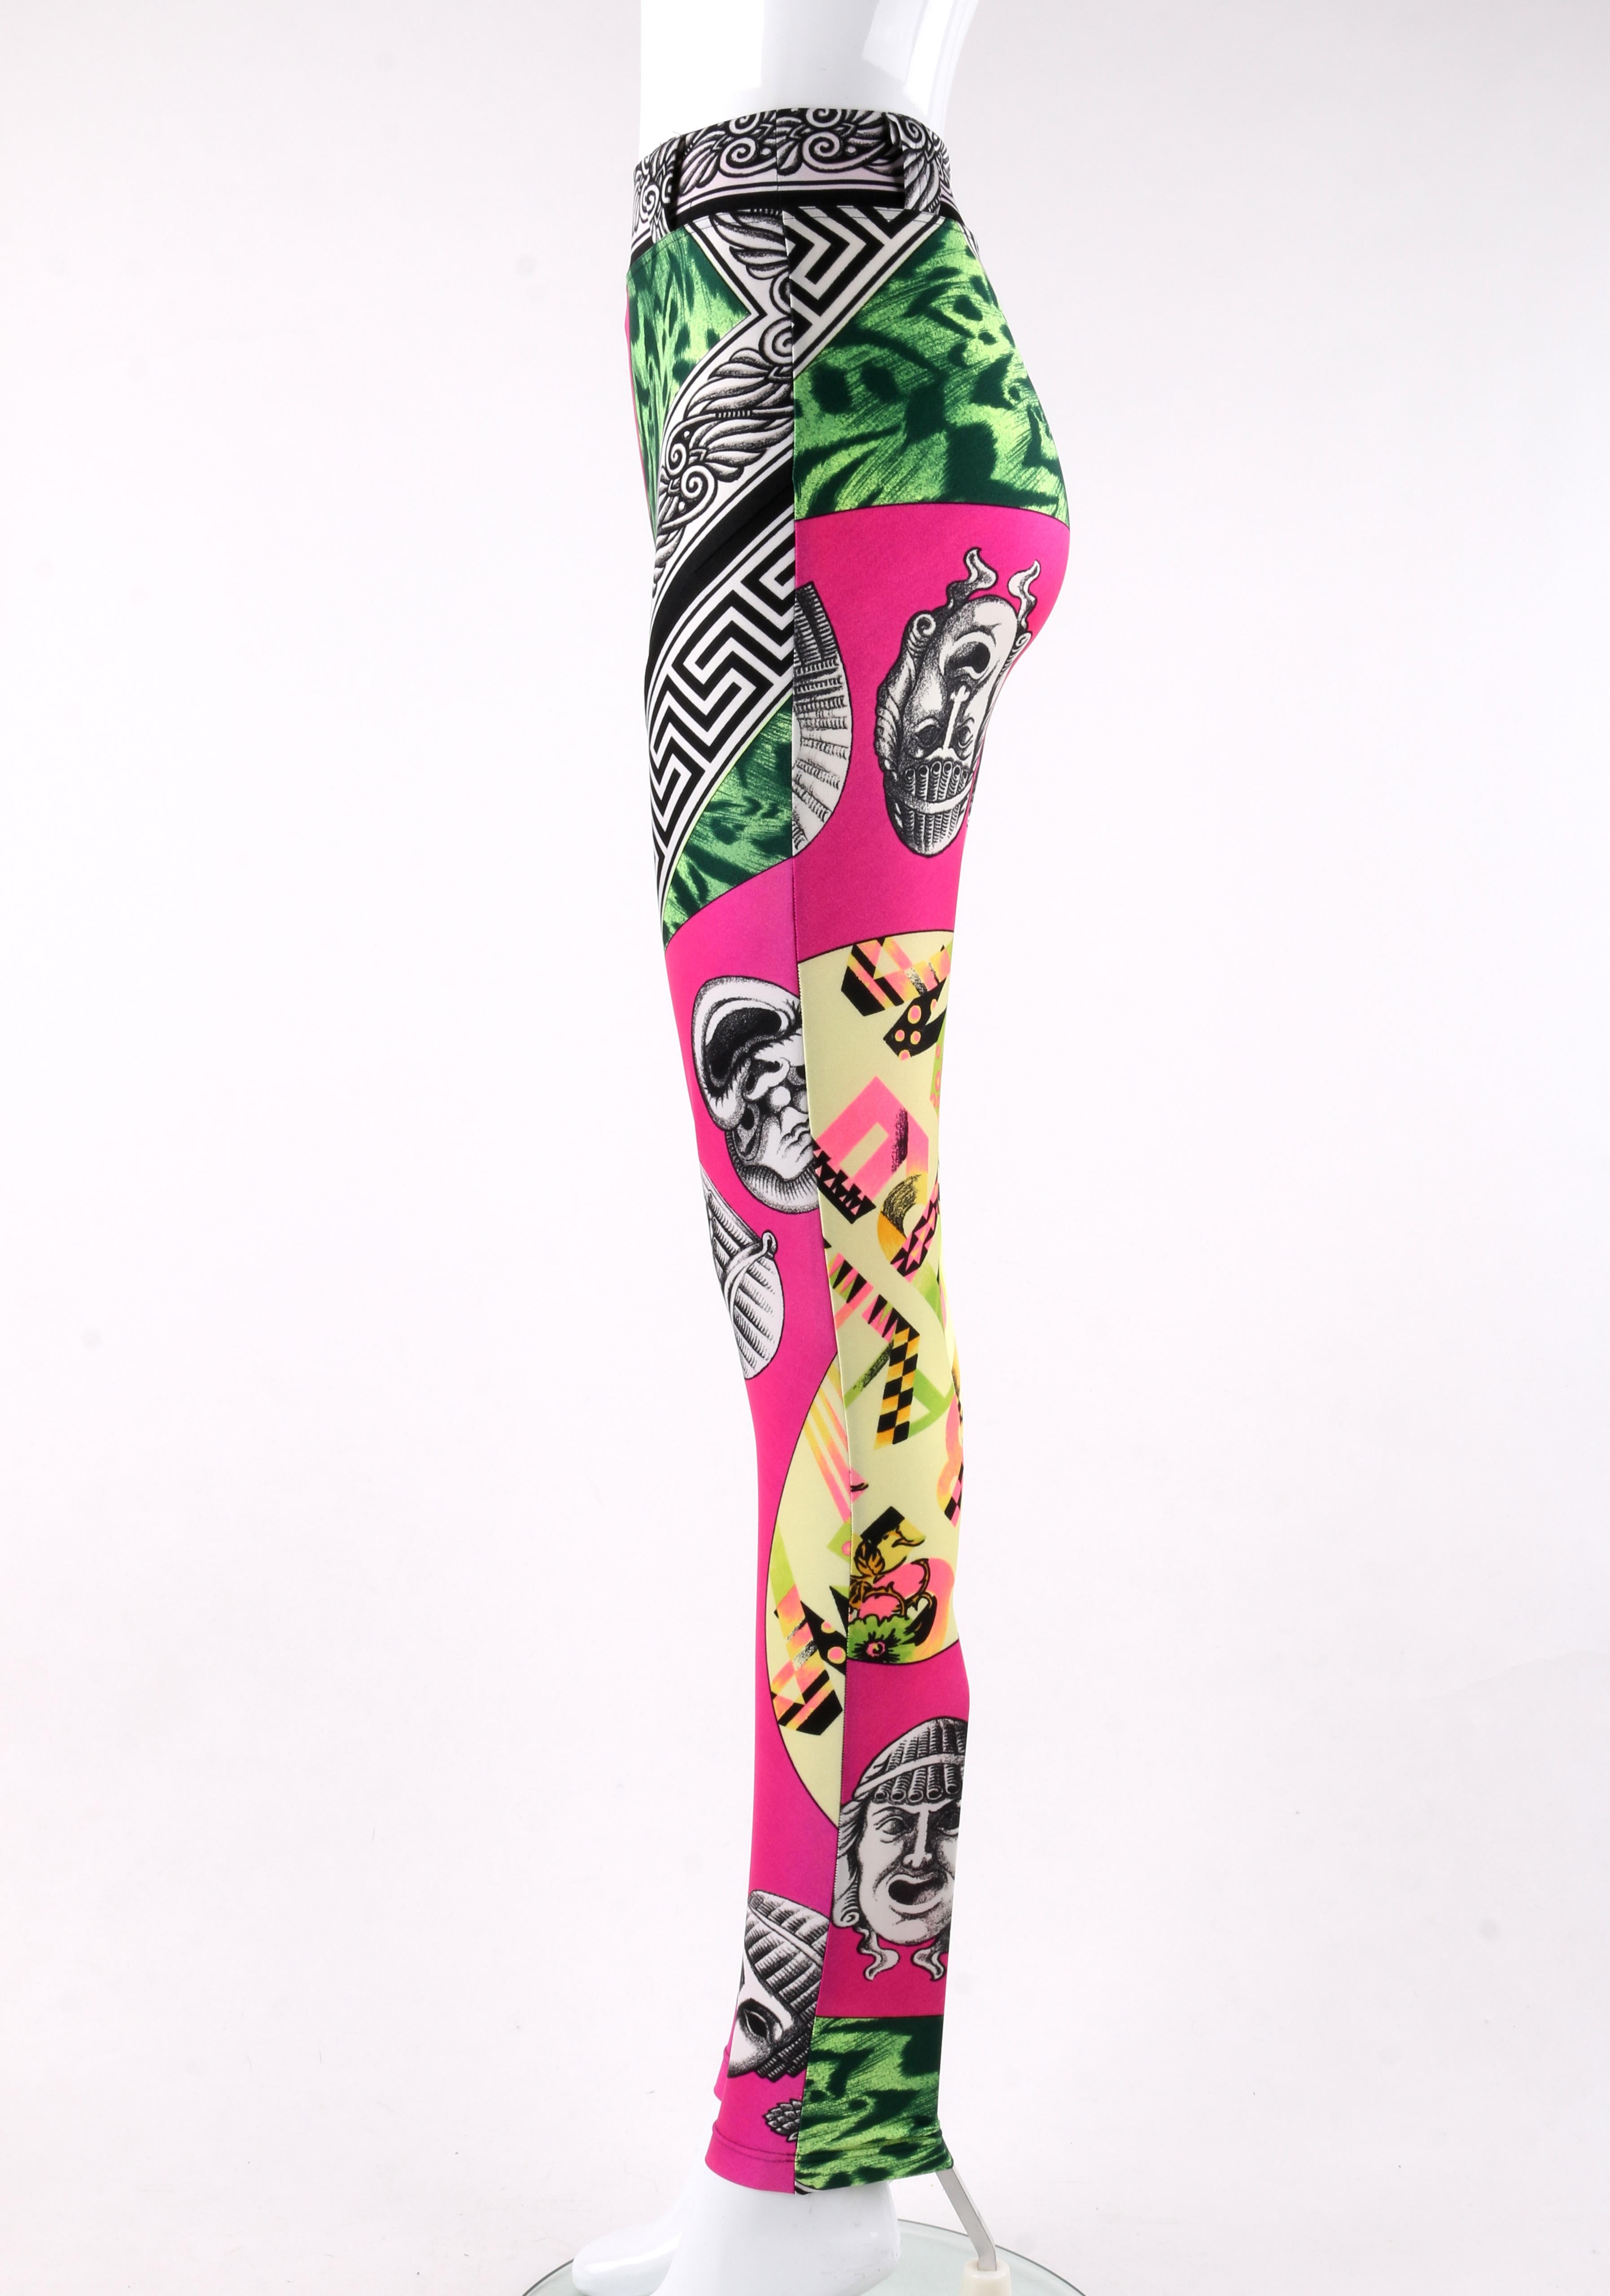 Gray GIANNI VERSACE S/S 1991 “Warhol” Balletto Teatro Printed Leggings  For Sale